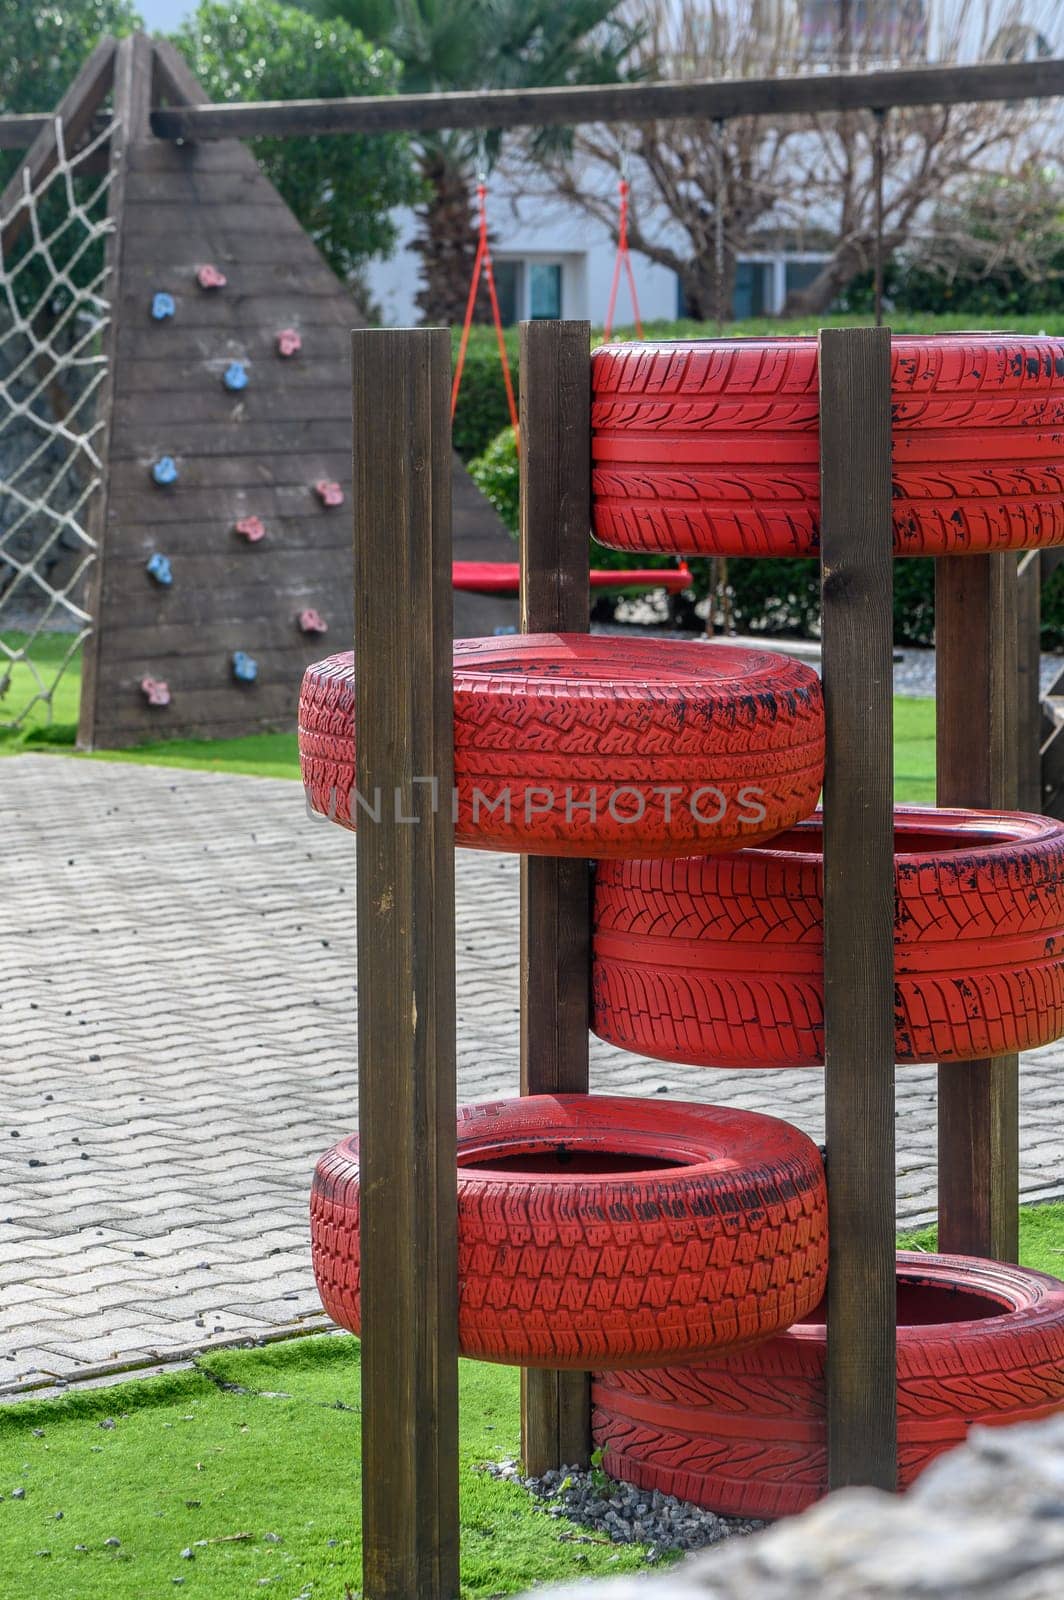 children's playground made from car tires, tire recycling